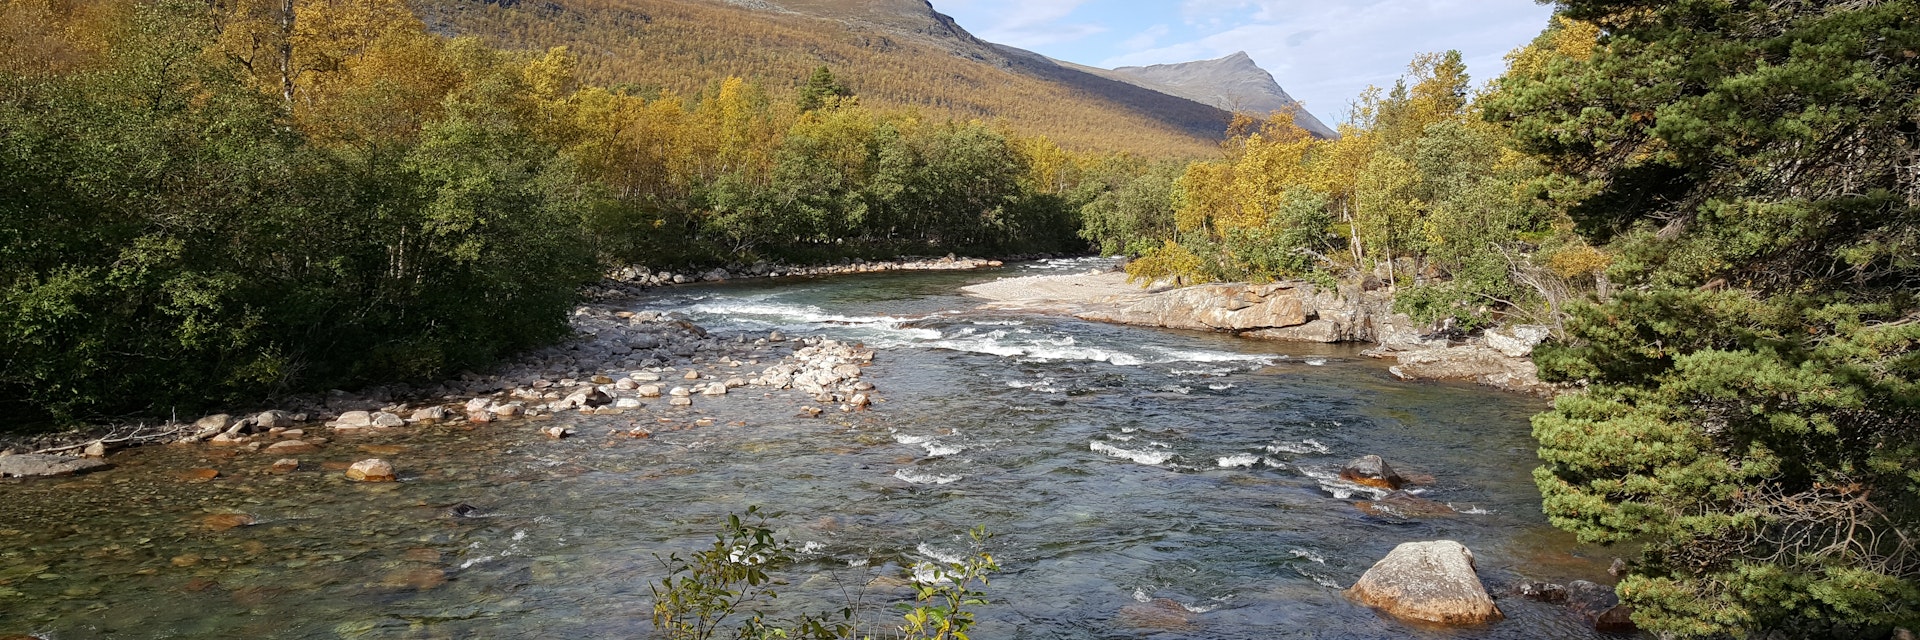 River during autumn at Ovre Dividal National Park, Norway.